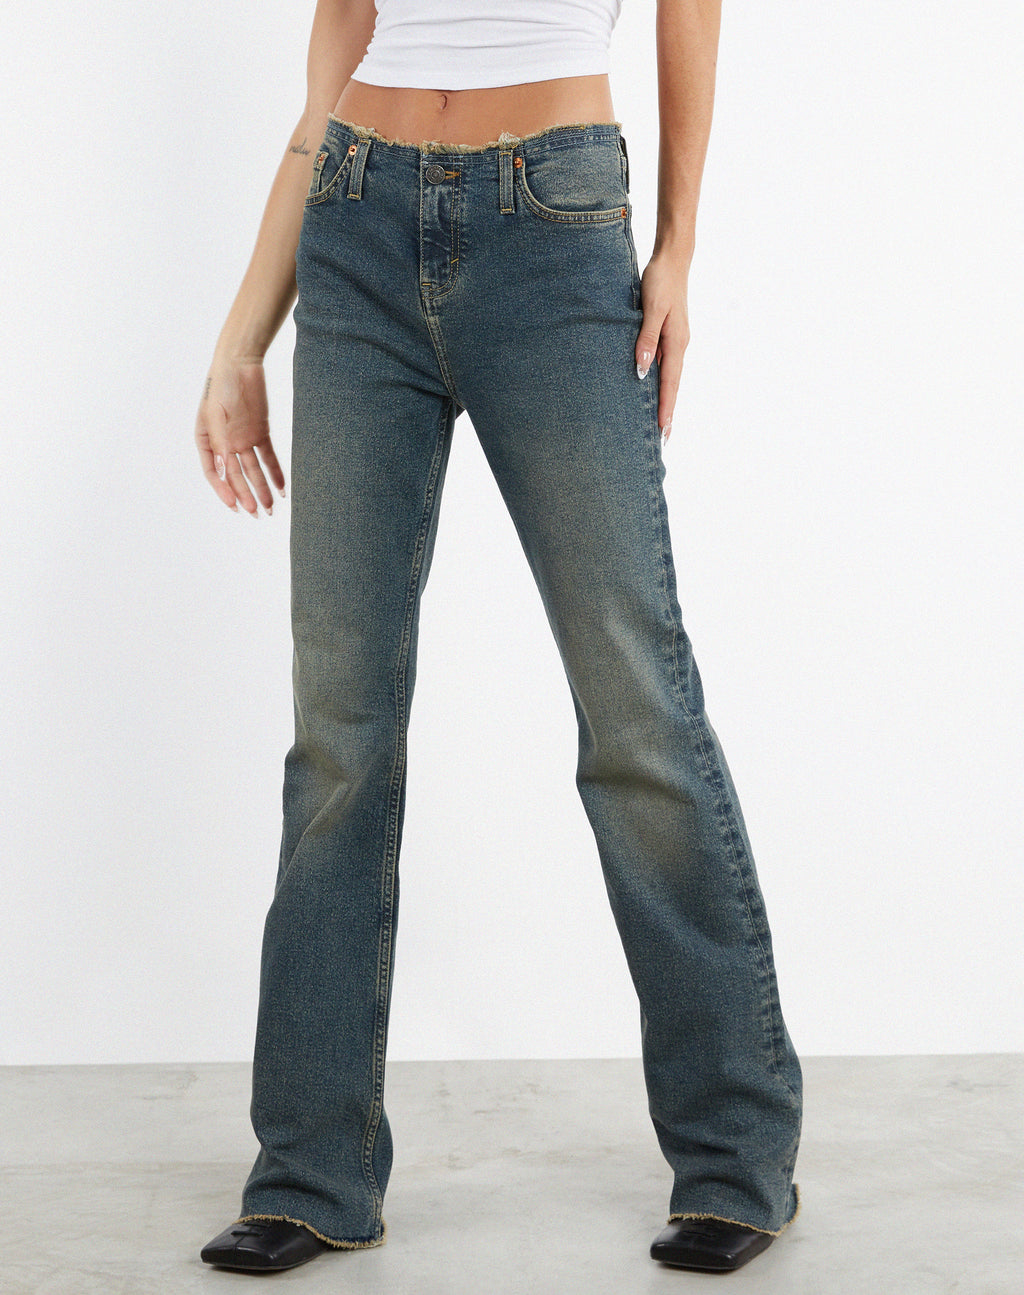 Frayed Low Rise Jeans in Brown and Blue Acid